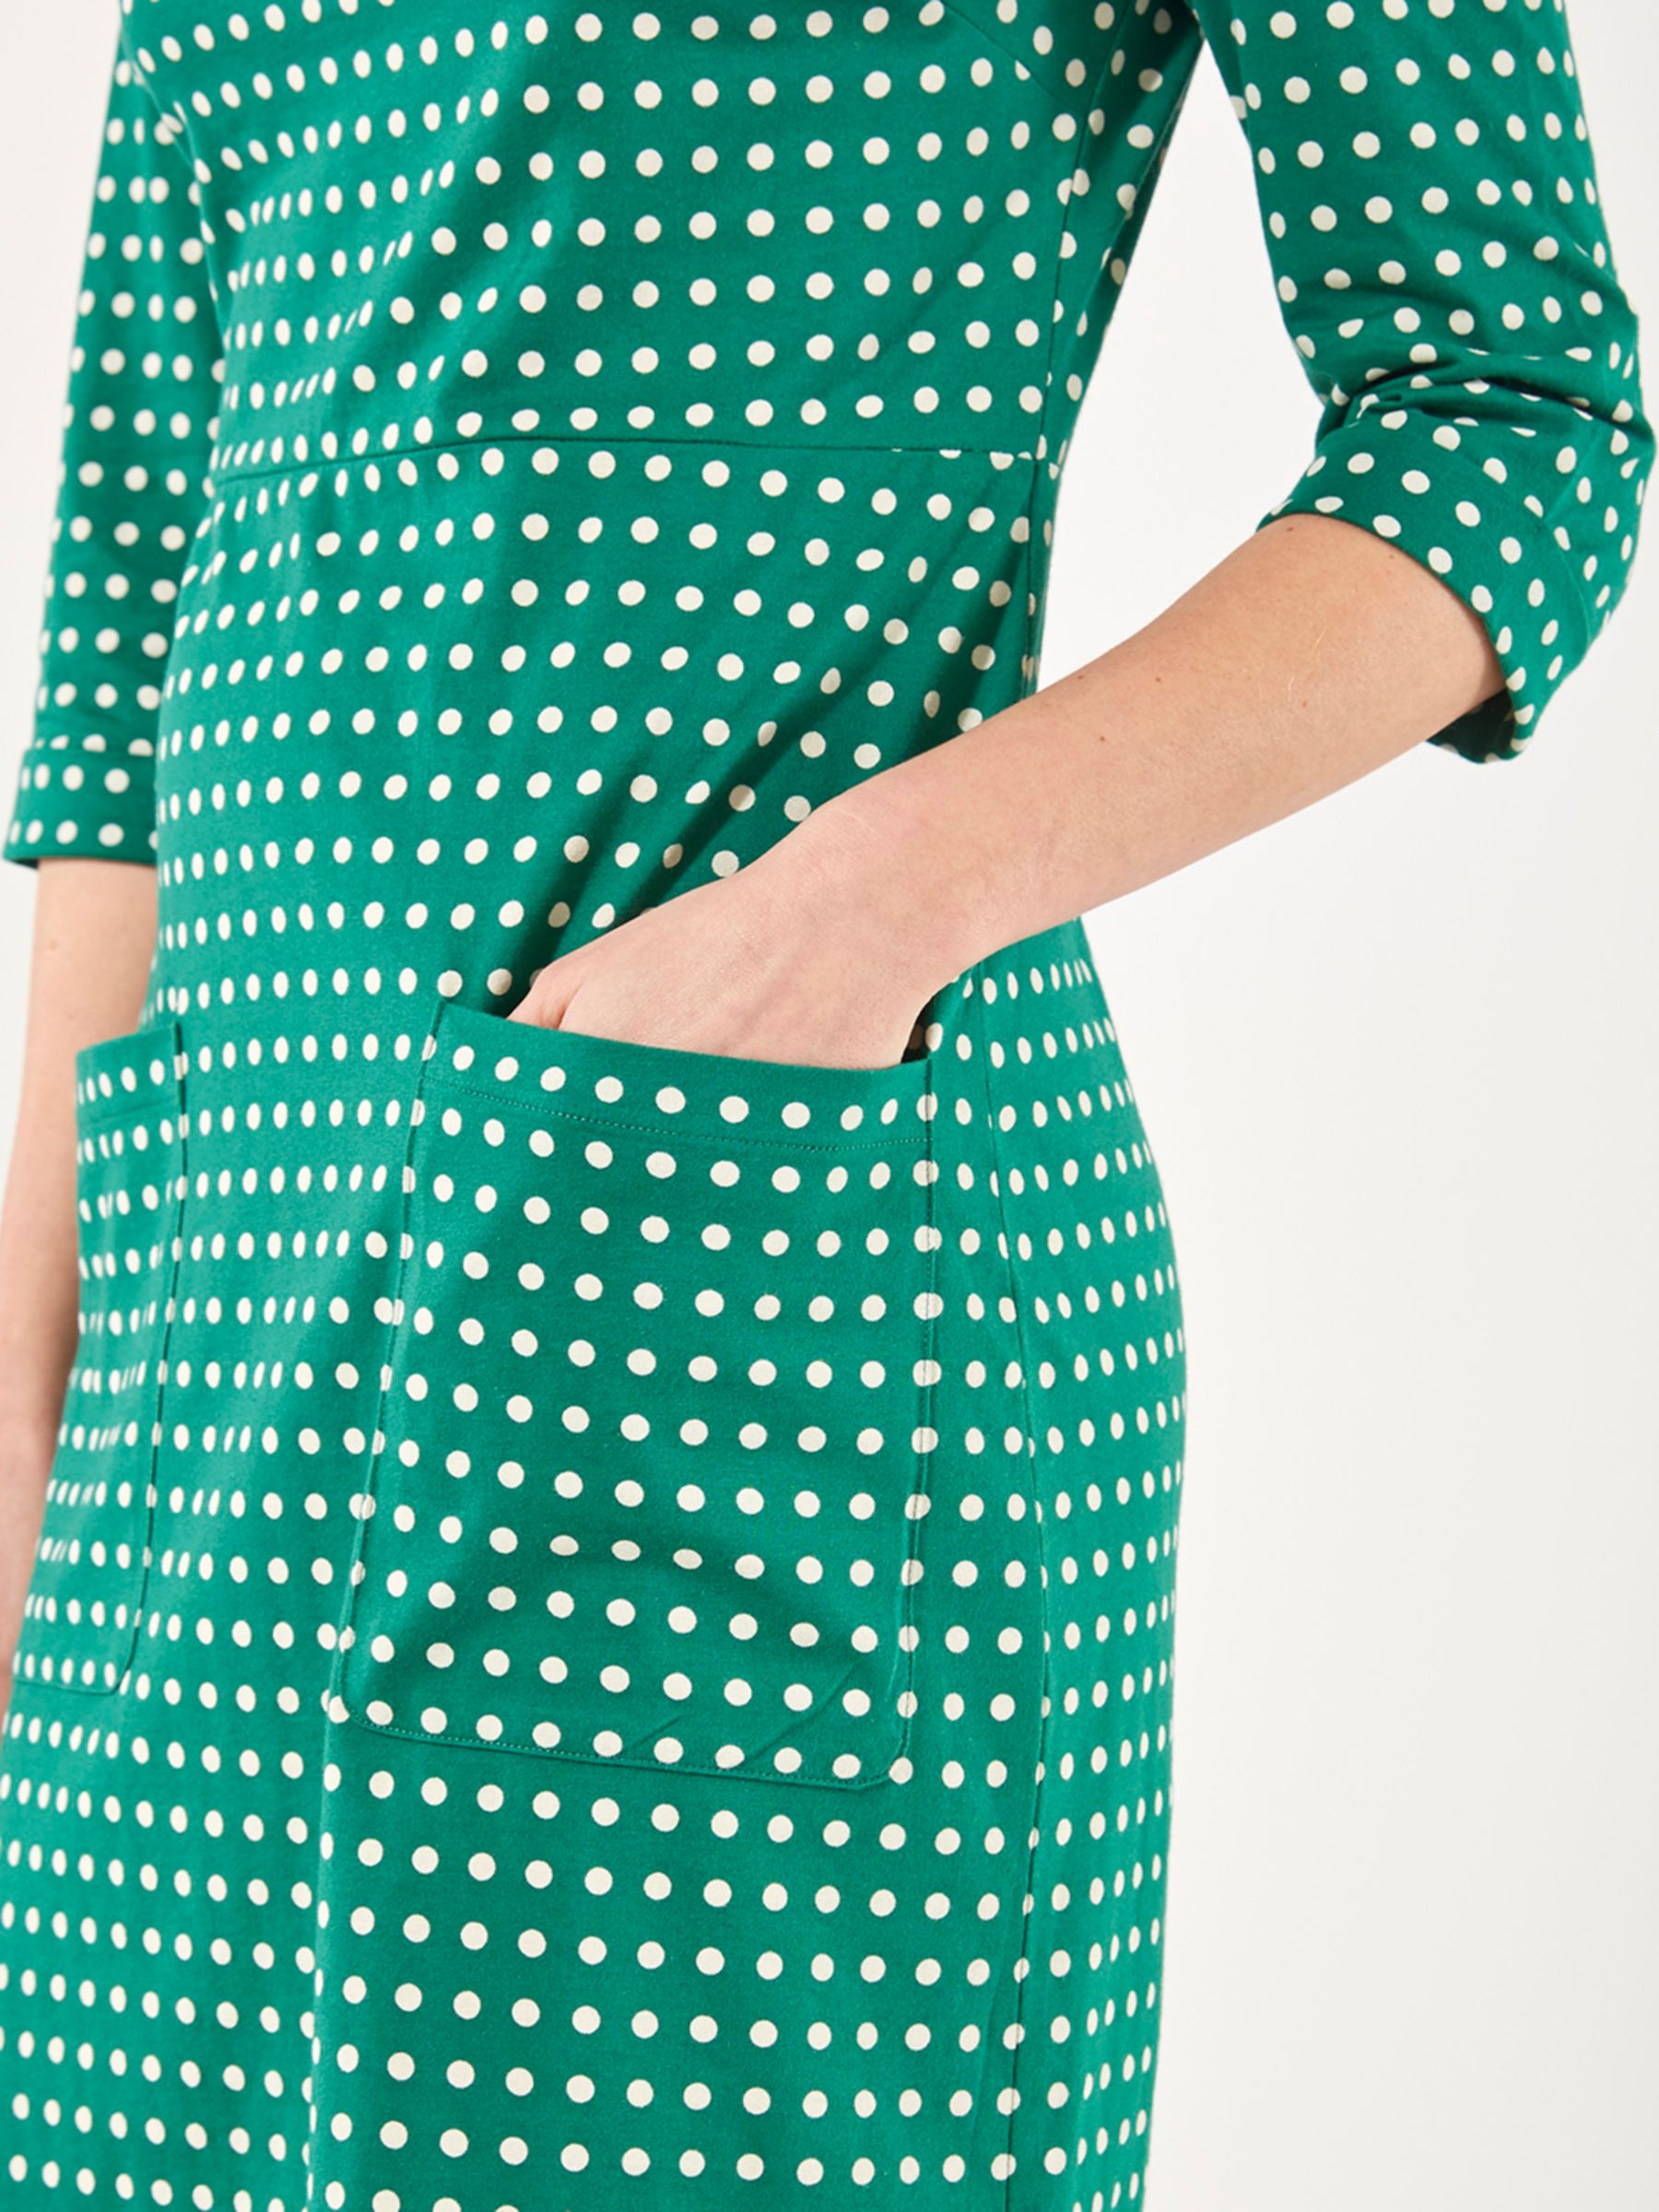 green dress with white spots